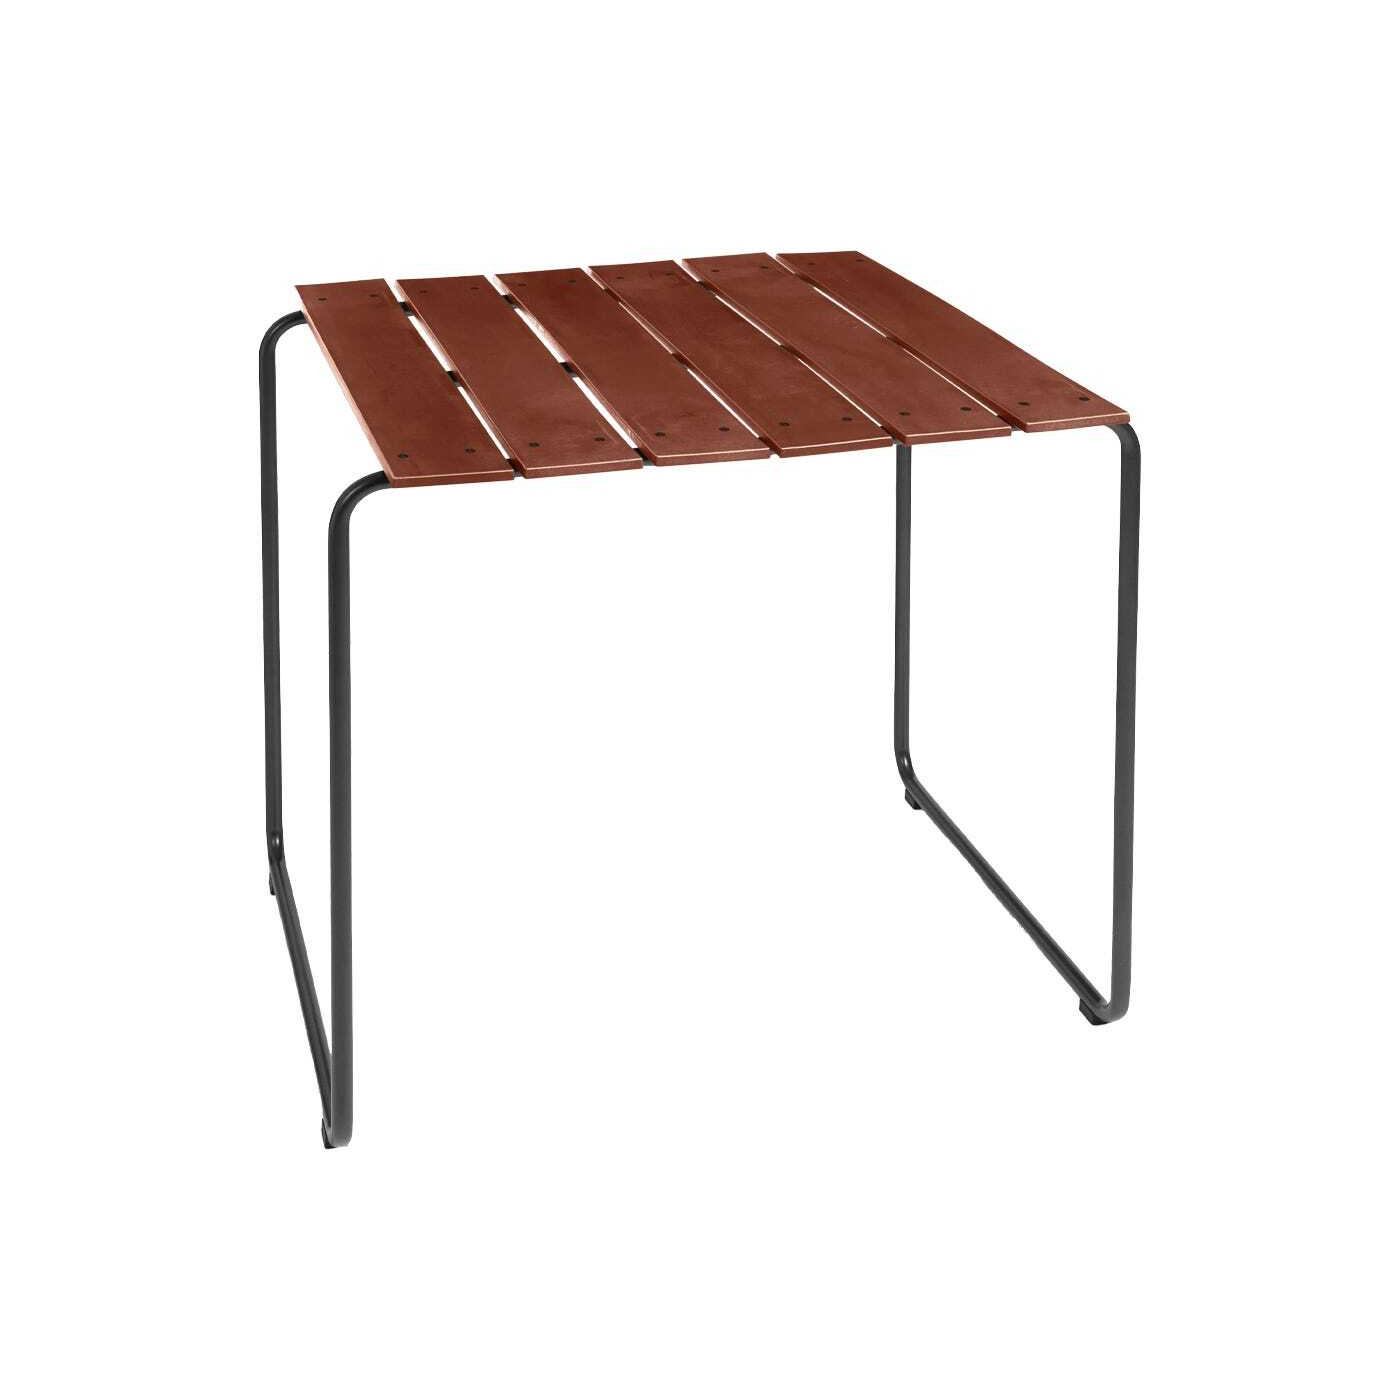 Mater Ocean Outdoor Small Dining Table in Burnt Red - image 1